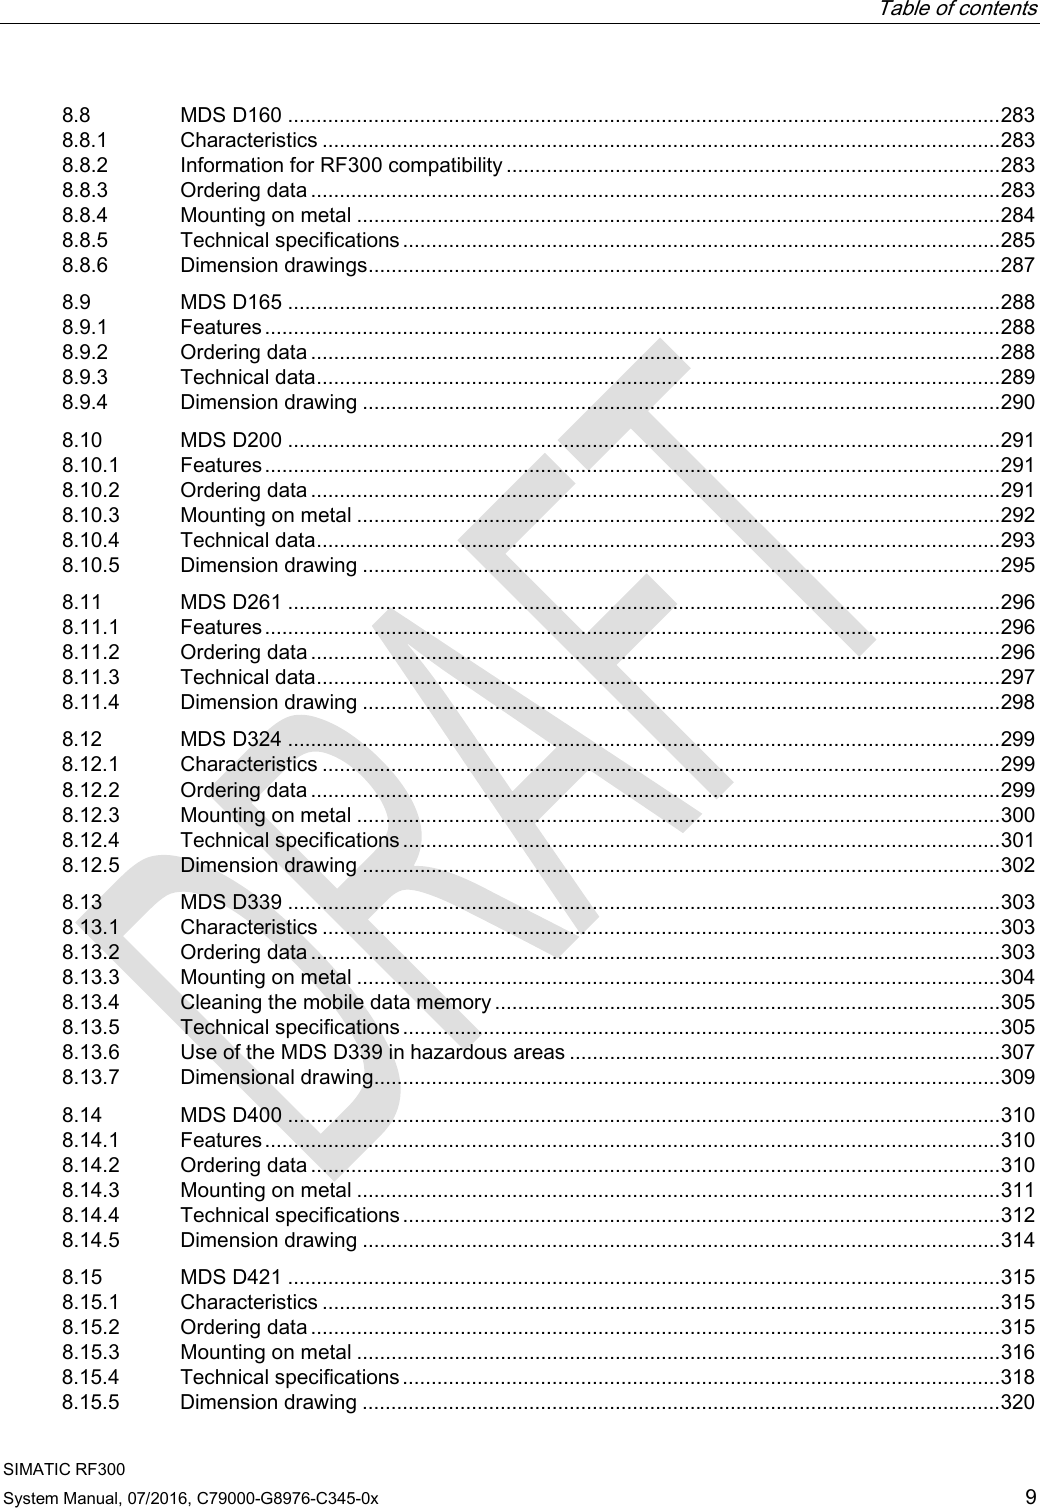  Table of contents  SIMATIC RF300 System Manual, 07/2016, C79000-G8976-C345-0x 9 8.8 MDS D160 ............................................................................................................................ 283 8.8.1 Characteristics ...................................................................................................................... 283 8.8.2 Information for RF300 compatibility ...................................................................................... 283 8.8.3 Ordering data ........................................................................................................................ 283 8.8.4 Mounting on metal ................................................................................................................ 284 8.8.5 Technical specifications ........................................................................................................ 285 8.8.6 Dimension drawings .............................................................................................................. 287 8.9 MDS D165 ............................................................................................................................ 288 8.9.1 Features ................................................................................................................................ 288 8.9.2 Ordering data ........................................................................................................................ 288 8.9.3 Technical data ....................................................................................................................... 289 8.9.4 Dimension drawing ............................................................................................................... 290 8.10 MDS D200 ............................................................................................................................ 291 8.10.1 Features ................................................................................................................................ 291 8.10.2 Ordering data ........................................................................................................................ 291 8.10.3 Mounting on metal ................................................................................................................ 292 8.10.4 Technical data ....................................................................................................................... 293 8.10.5 Dimension drawing ............................................................................................................... 295 8.11 MDS D261 ............................................................................................................................ 296 8.11.1 Features ................................................................................................................................ 296 8.11.2 Ordering data ........................................................................................................................ 296 8.11.3 Technical data ....................................................................................................................... 297 8.11.4 Dimension drawing ............................................................................................................... 298 8.12 MDS D324 ............................................................................................................................ 299 8.12.1 Characteristics ...................................................................................................................... 299 8.12.2 Ordering data ........................................................................................................................ 299 8.12.3 Mounting on metal ................................................................................................................ 300 8.12.4 Technical specifications ........................................................................................................ 301 8.12.5 Dimension drawing ............................................................................................................... 302 8.13 MDS D339 ............................................................................................................................ 303 8.13.1 Characteristics ...................................................................................................................... 303 8.13.2 Ordering data ........................................................................................................................ 303 8.13.3 Mounting on metal ................................................................................................................ 304 8.13.4 Cleaning the mobile data memory ........................................................................................ 305 8.13.5 Technical specifications ........................................................................................................ 305 8.13.6 Use of the MDS D339 in hazardous areas ........................................................................... 307 8.13.7 Dimensional drawing............................................................................................................. 309 8.14 MDS D400 ............................................................................................................................ 310 8.14.1 Features ................................................................................................................................ 310 8.14.2 Ordering data ........................................................................................................................ 310 8.14.3 Mounting on metal ................................................................................................................ 311 8.14.4 Technical specifications ........................................................................................................ 312 8.14.5 Dimension drawing ............................................................................................................... 314 8.15 MDS D421 ............................................................................................................................ 315 8.15.1 Characteristics ...................................................................................................................... 315 8.15.2 Ordering data ........................................................................................................................ 315 8.15.3 Mounting on metal ................................................................................................................ 316 8.15.4 Technical specifications ........................................................................................................ 318 8.15.5 Dimension drawing ............................................................................................................... 320 